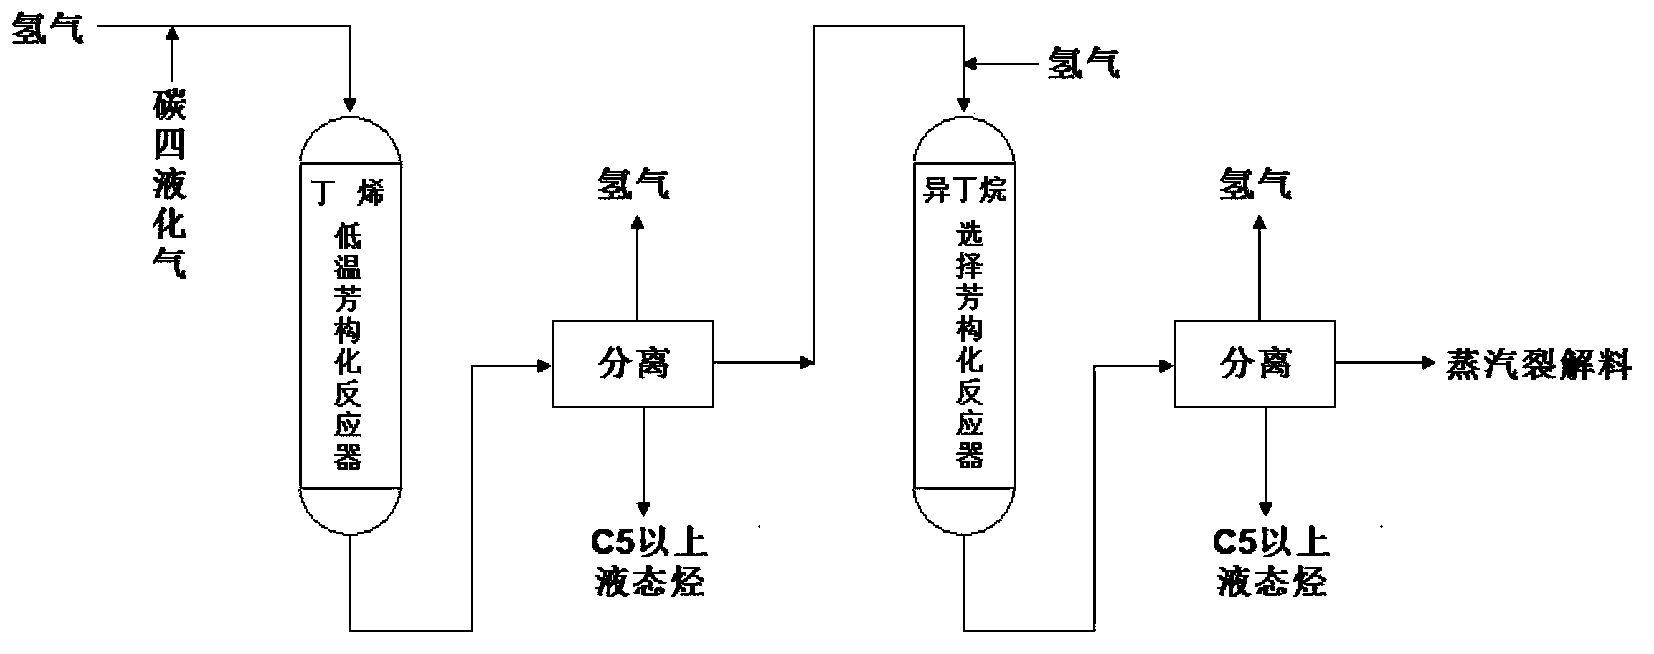 Two-stage reaction process of hydro-aromatization of C4 liquefied gas